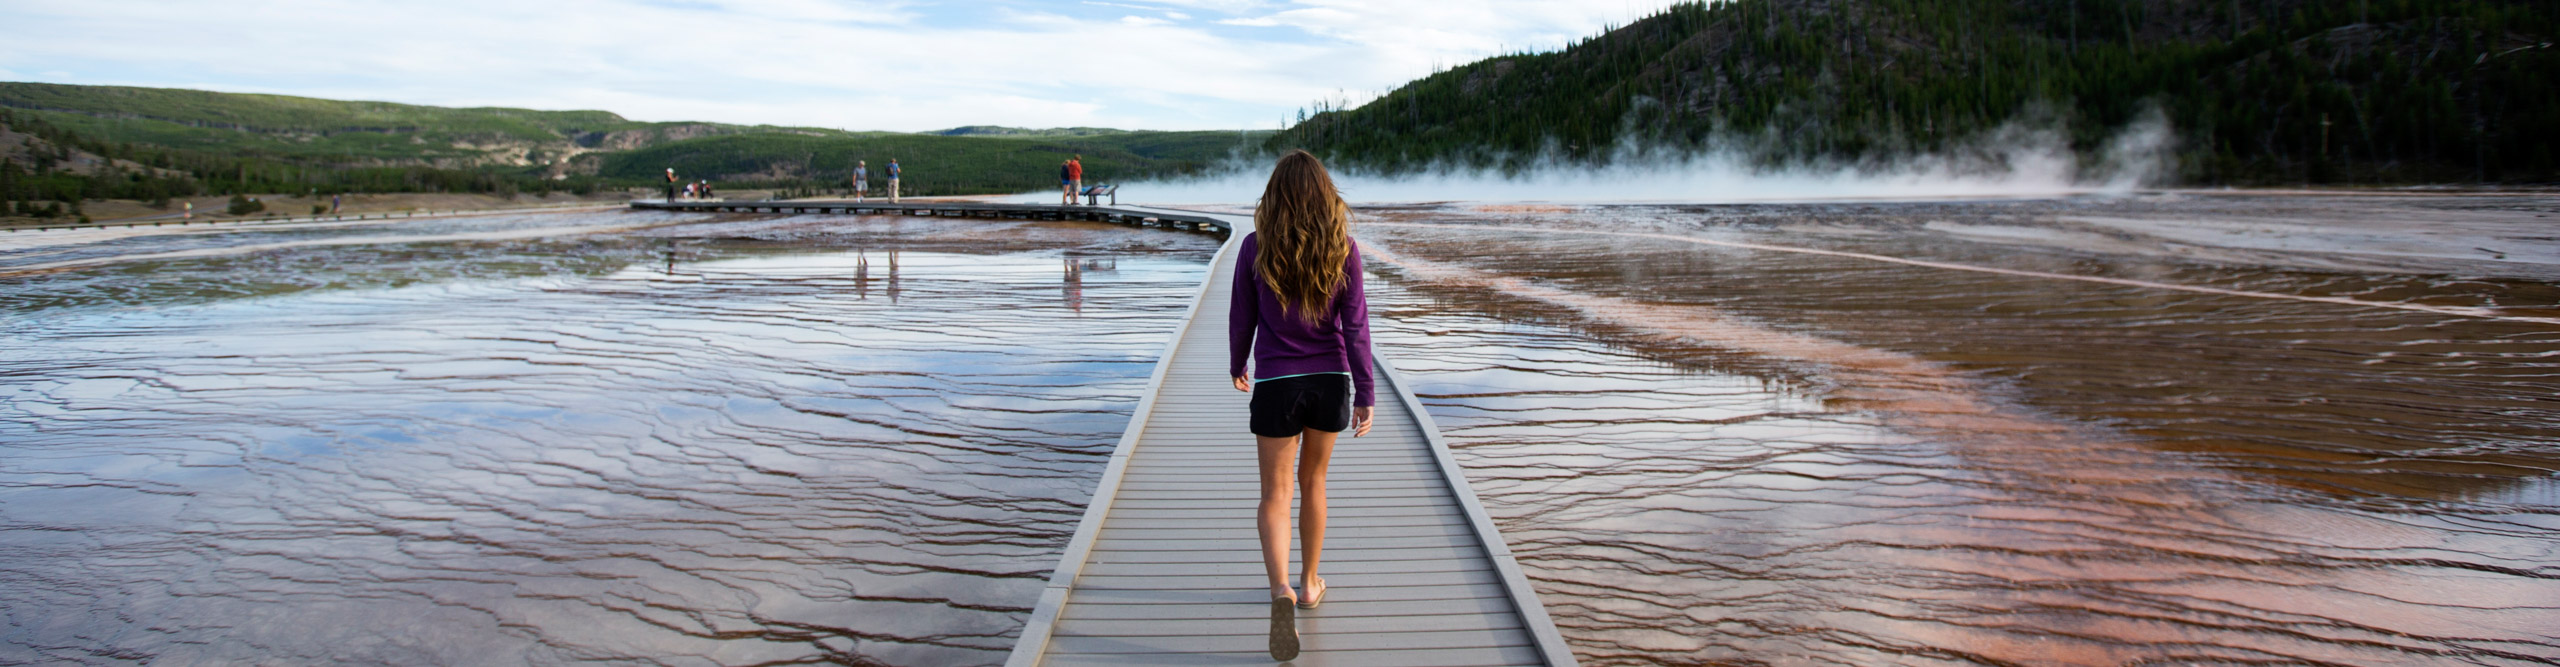 A young female hiking along a boardwalk over geothermal hot springs in Yellowstone National Park.